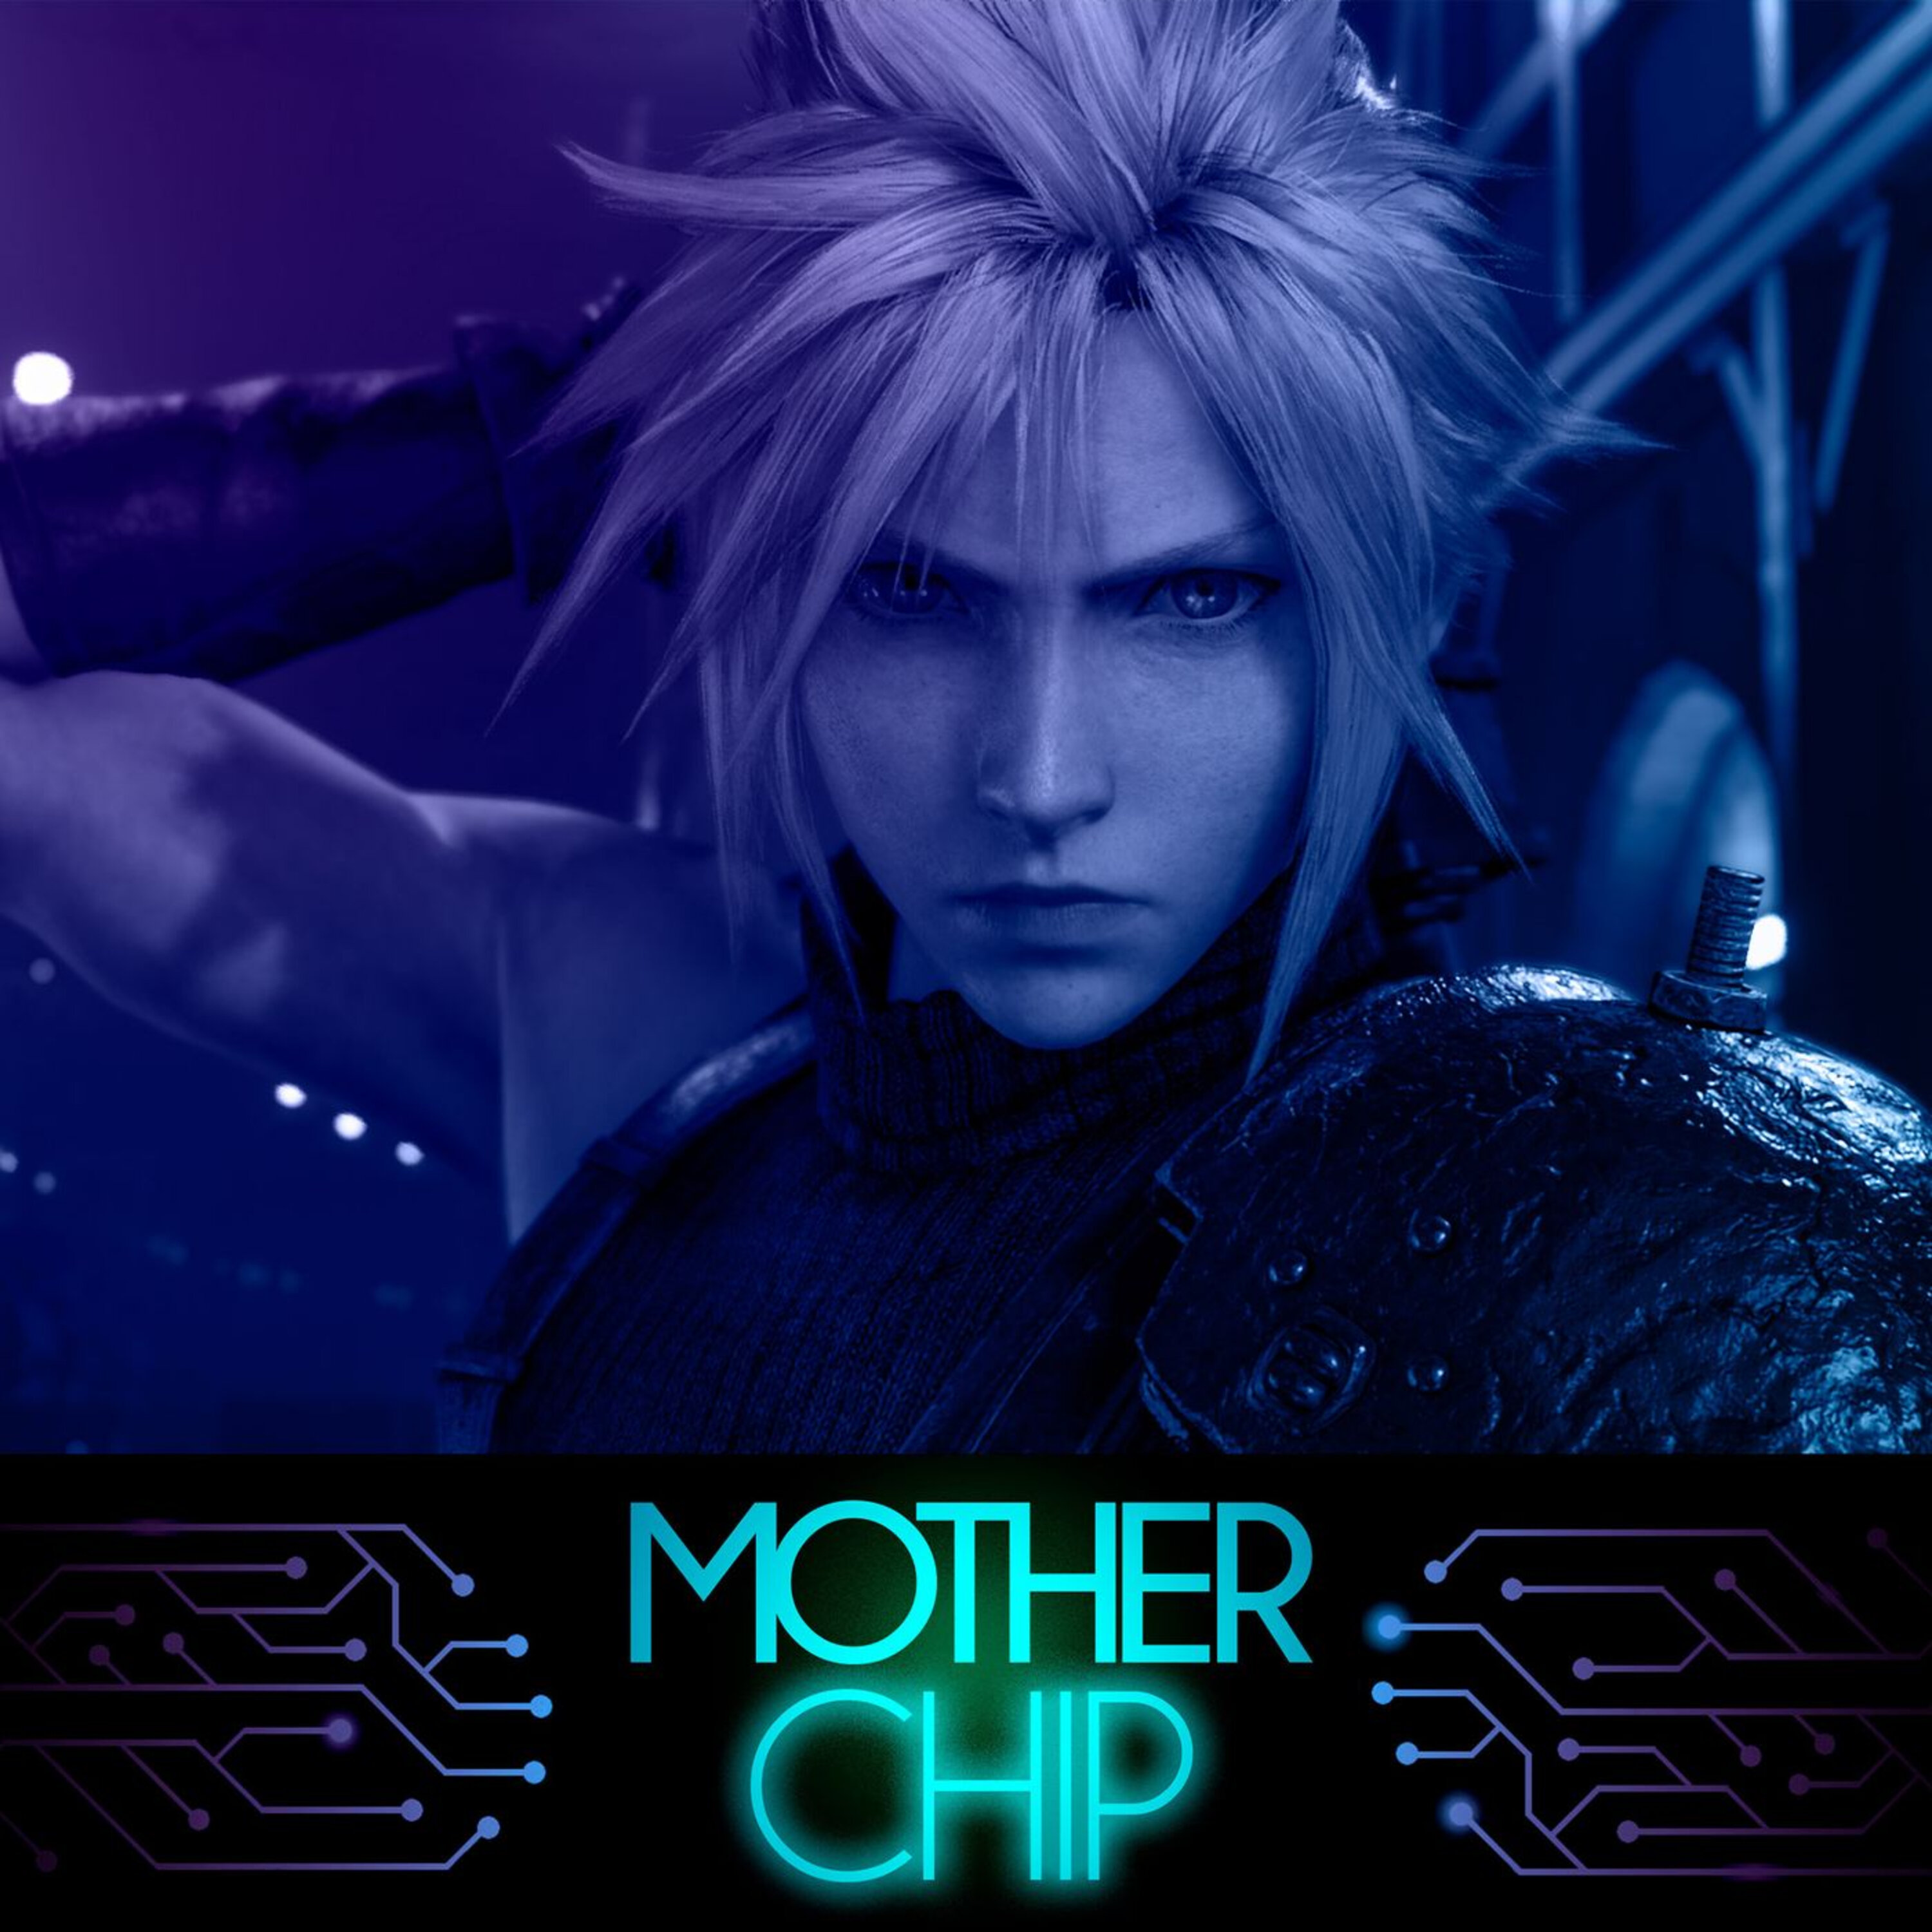 MotherChip #272 - Final Fantasy VII Remake, In Other Waters, Chess Rush e mais